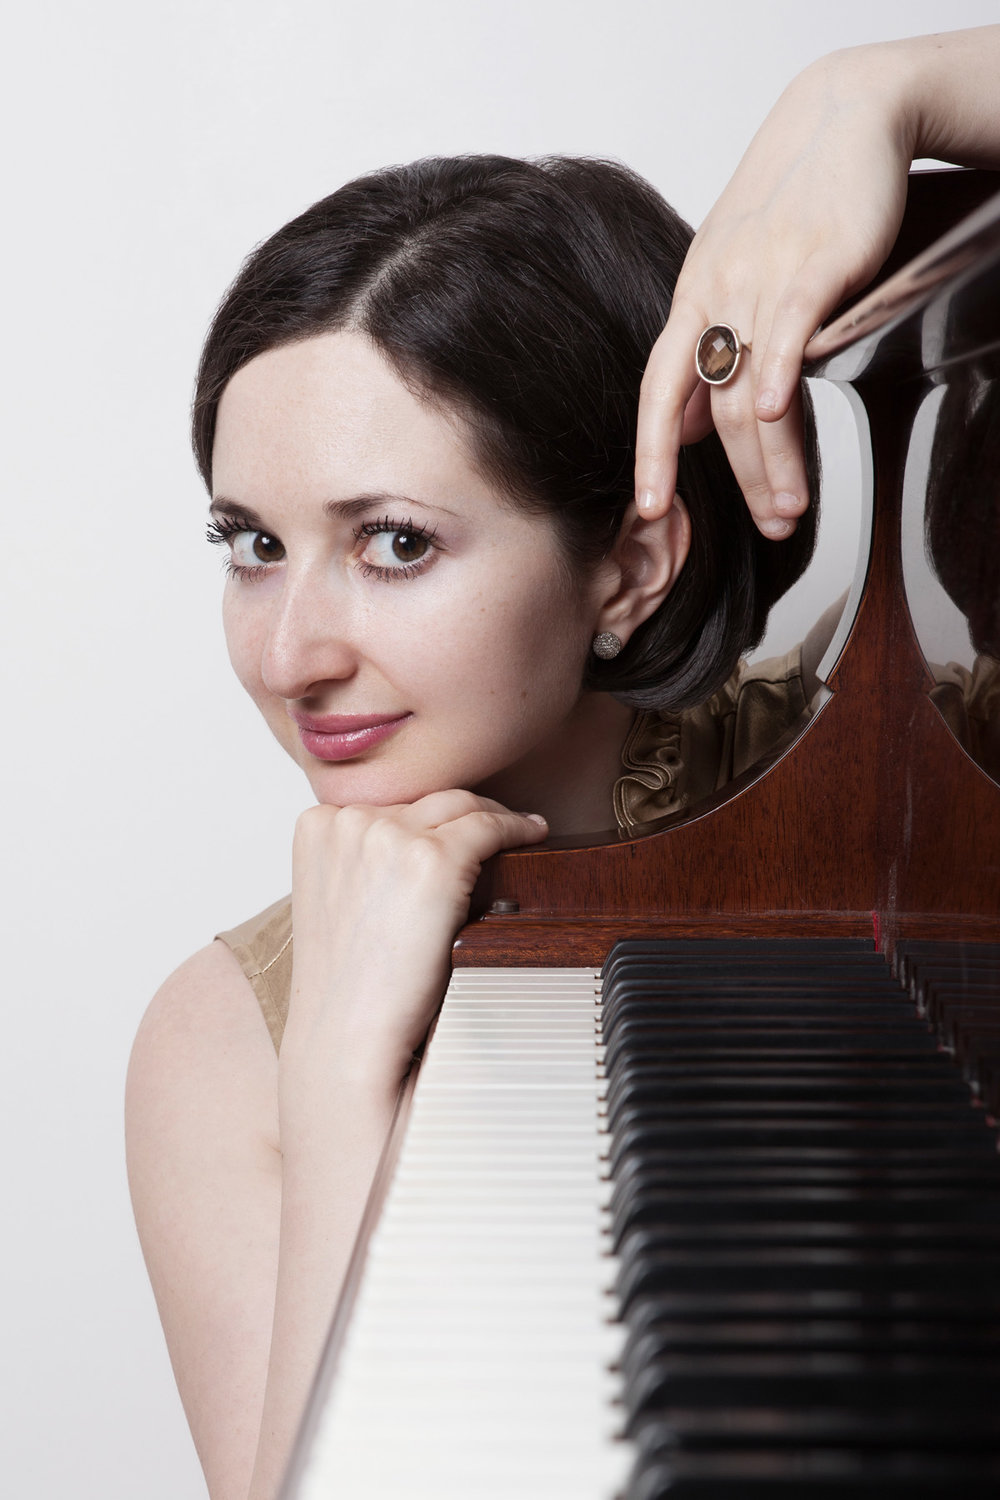 Yelena Grinberg will perform with Borislav Strulev on Tuesday, August 16 at the Shandelee Music Festival.